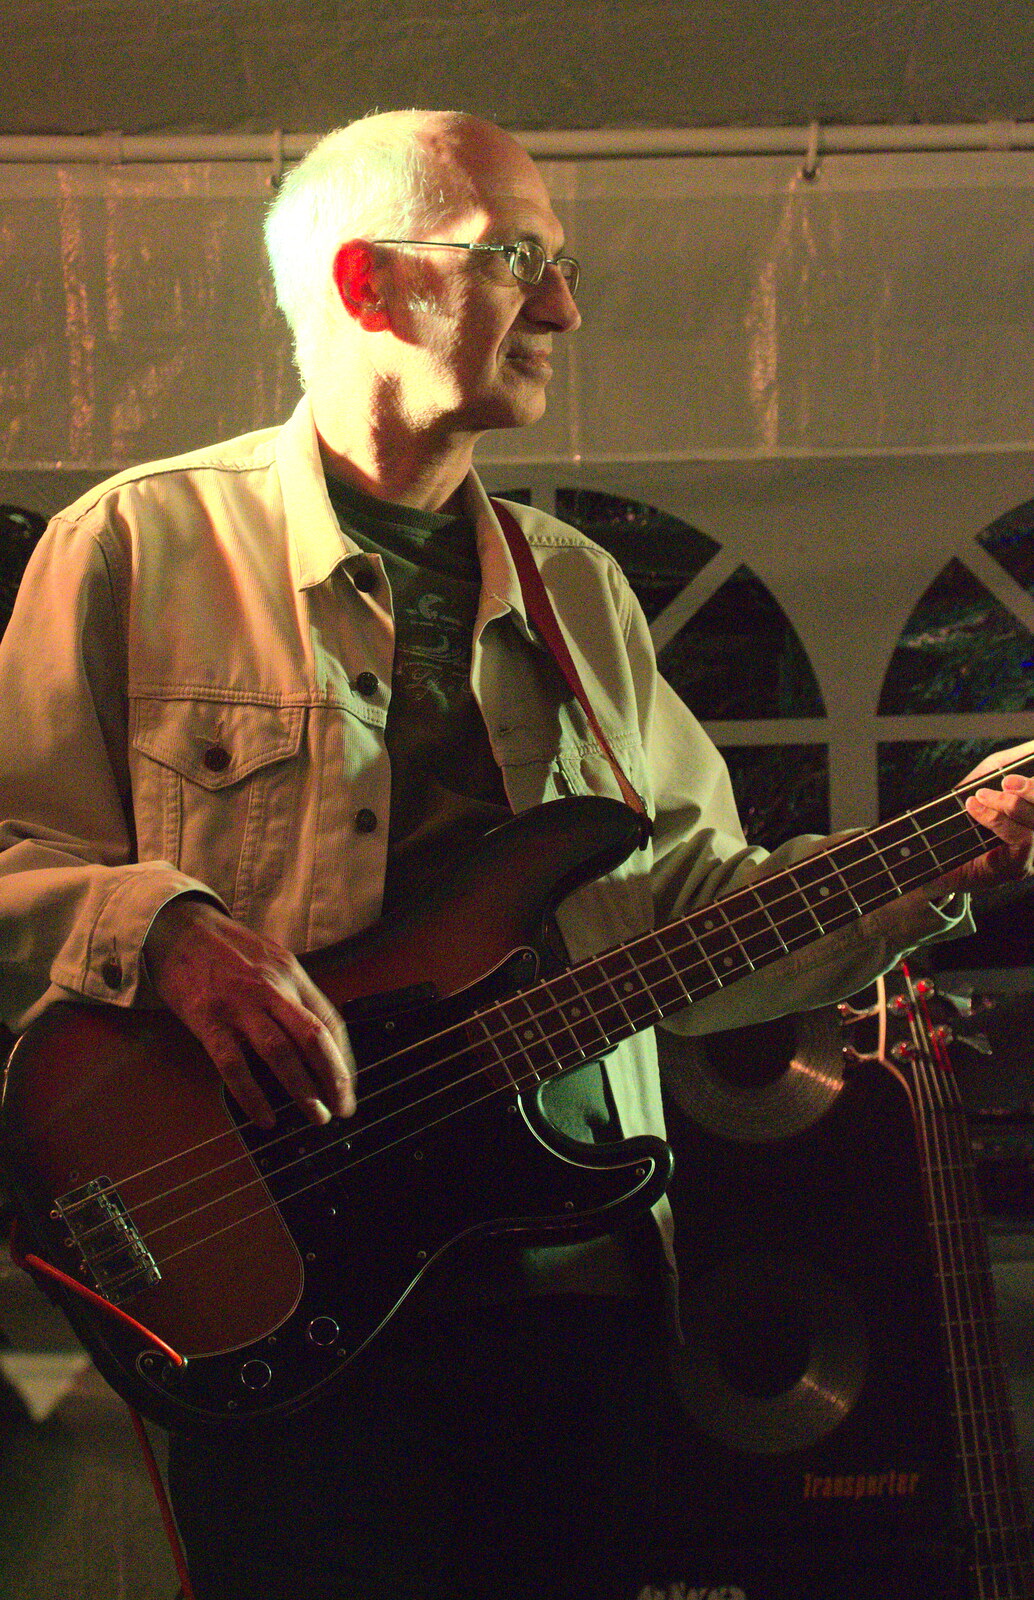 A bit of laid-back bass from Henry's 60th Birthday, Hethel, Norfolk - 3rd August 2013